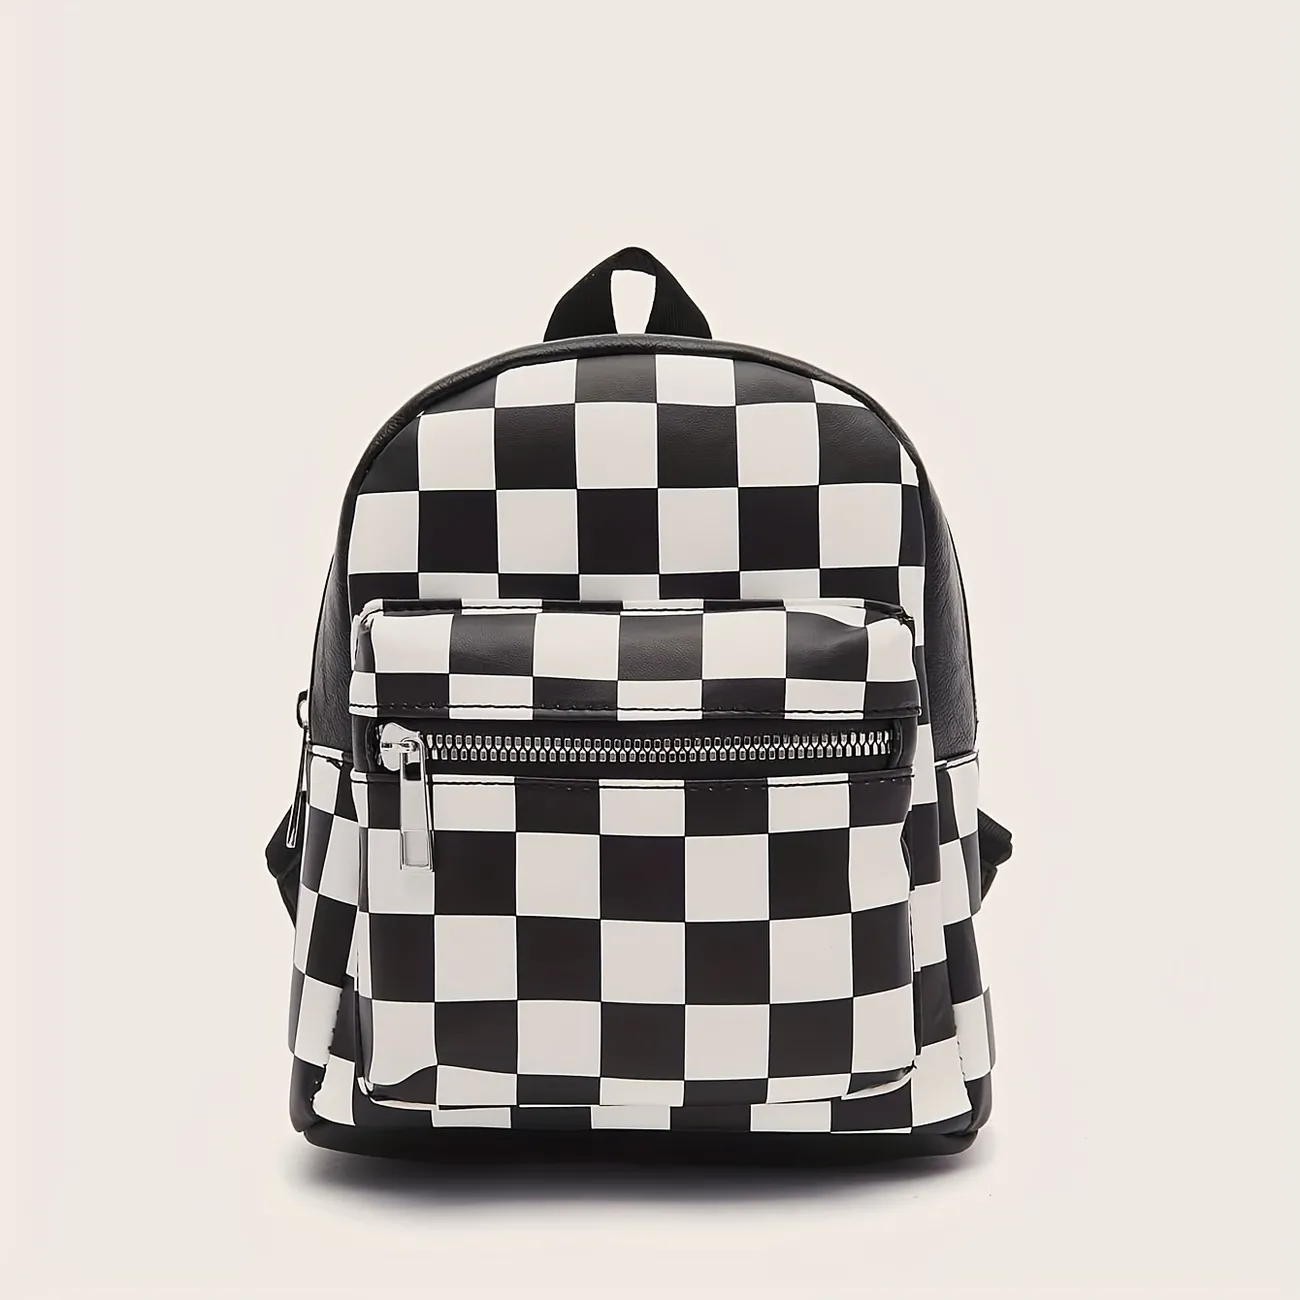 Checkered Backpack For Women, Mini Faux Leather Daypack, Plaid